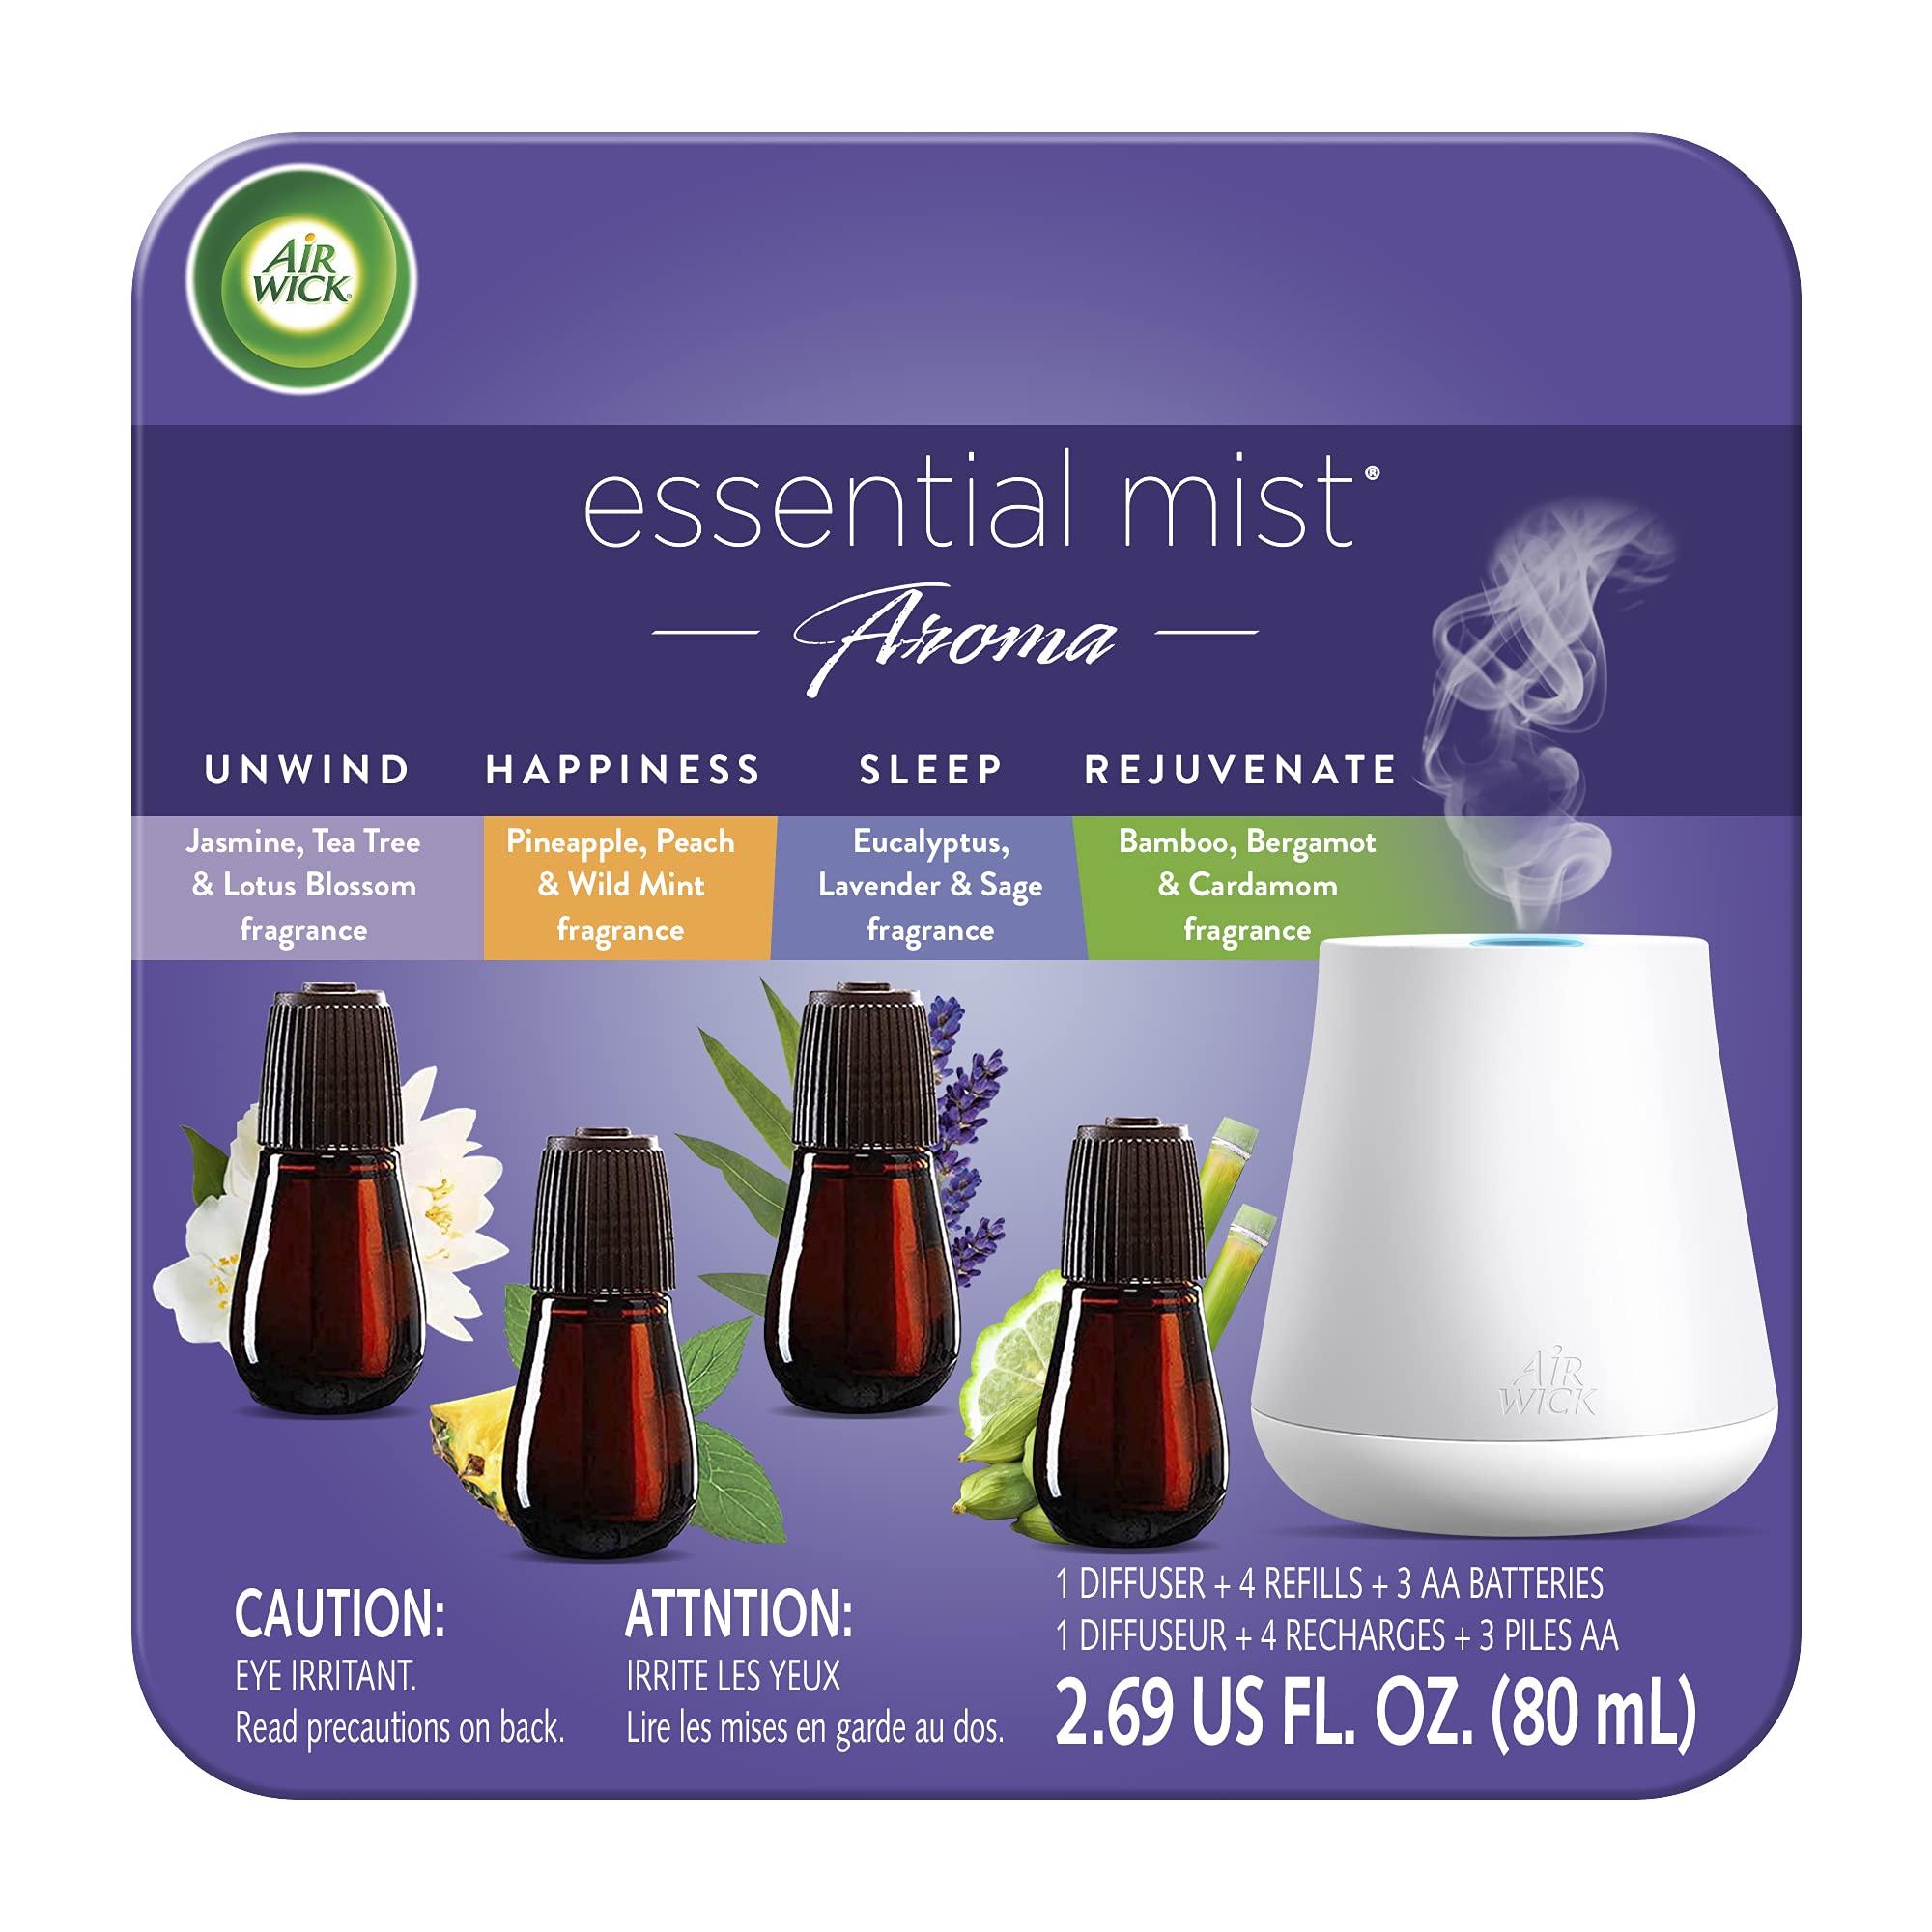 Air Wick Essential Mist Essential Oils Diffuser With 4 Refills,  Aromatherapy Combination With Sleep, Unwind, Happiness